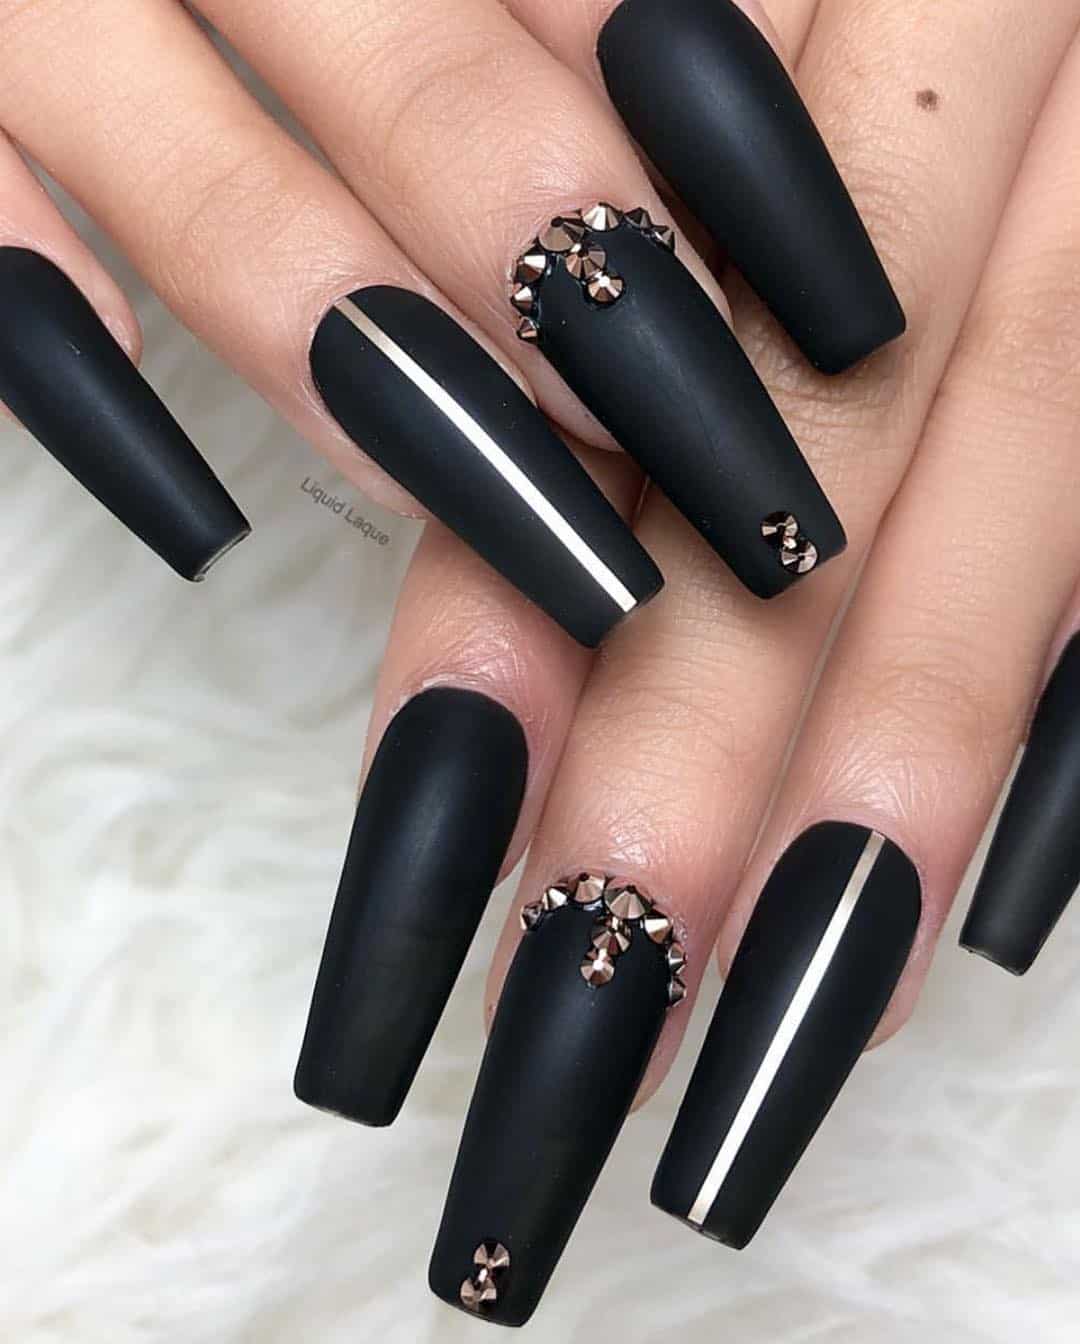 Creative Designs for Black Acrylic Nails